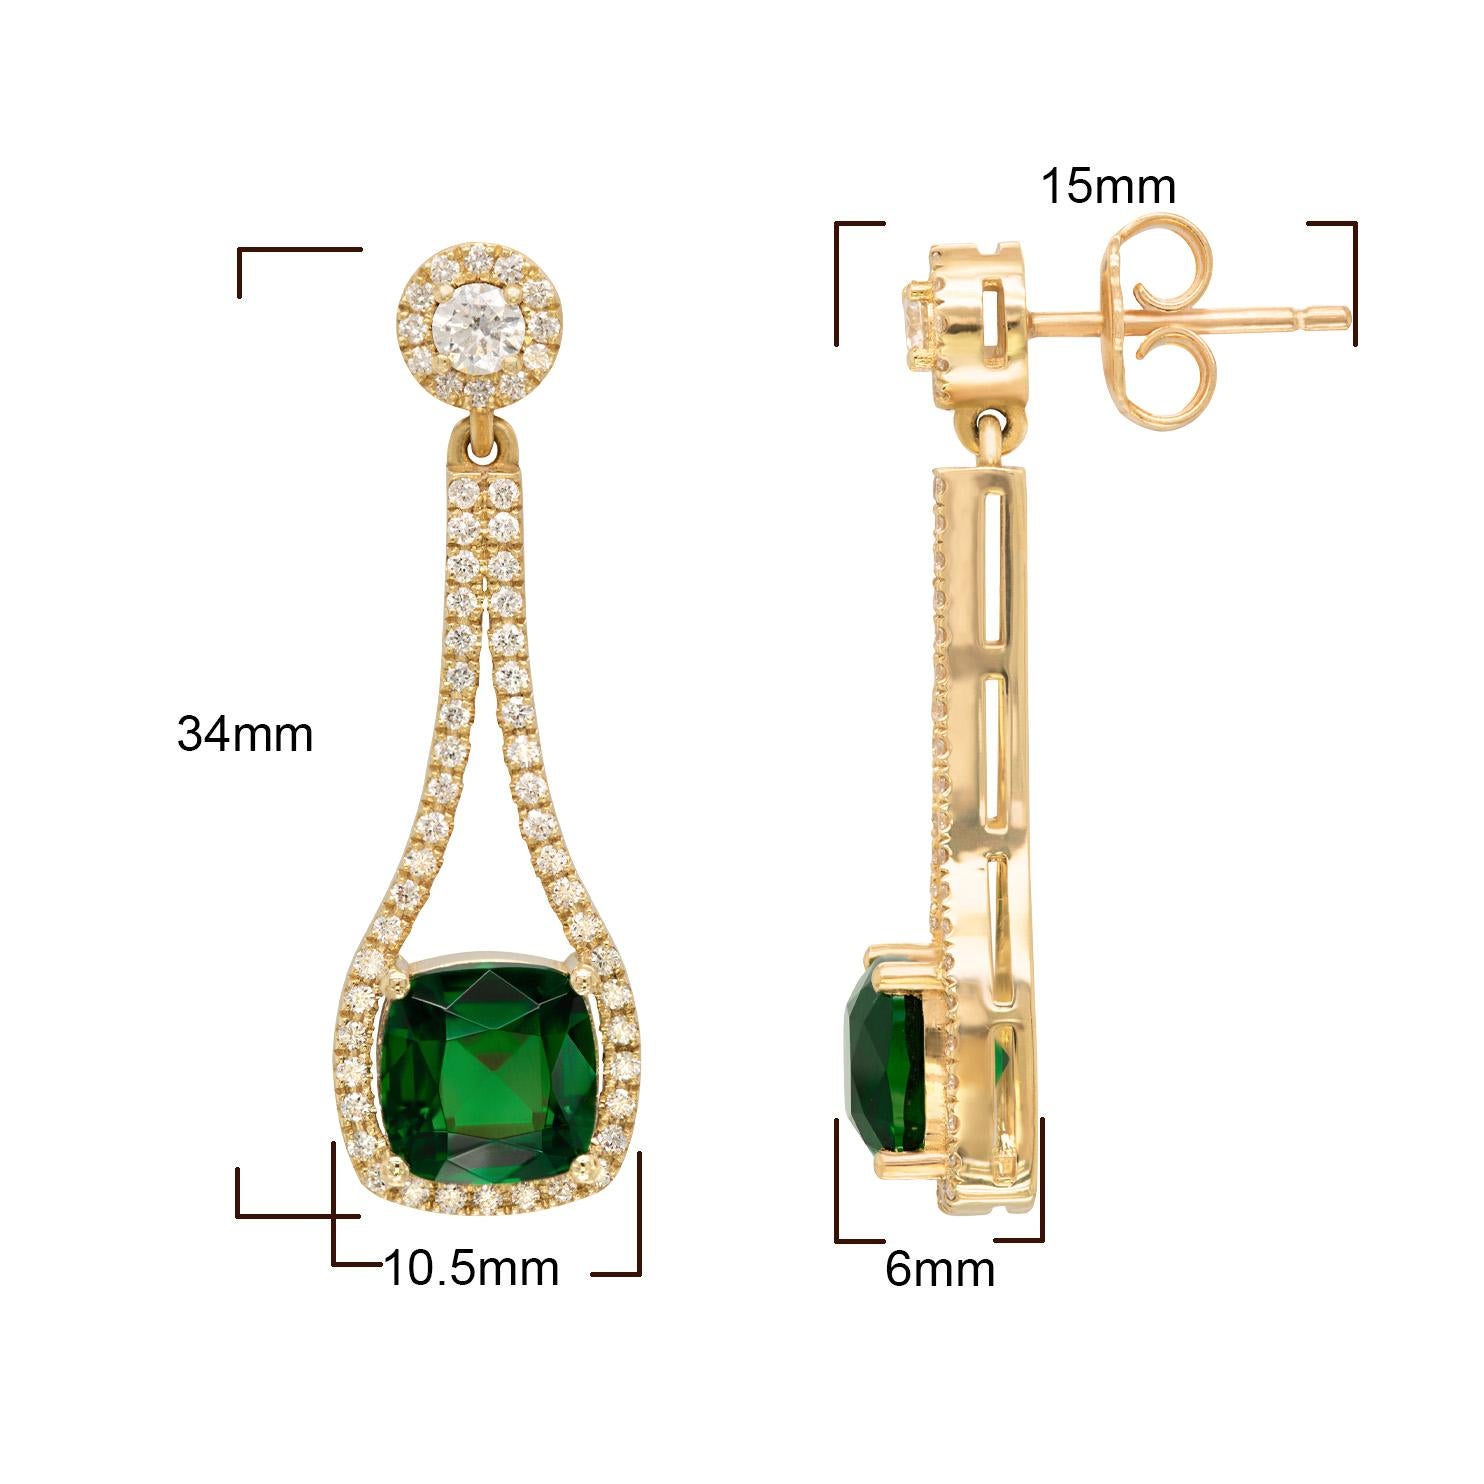 Natural Tourmalines 4.57 Carats set in 18K Yellow Gold Earrings with Diamonds For Sale 2